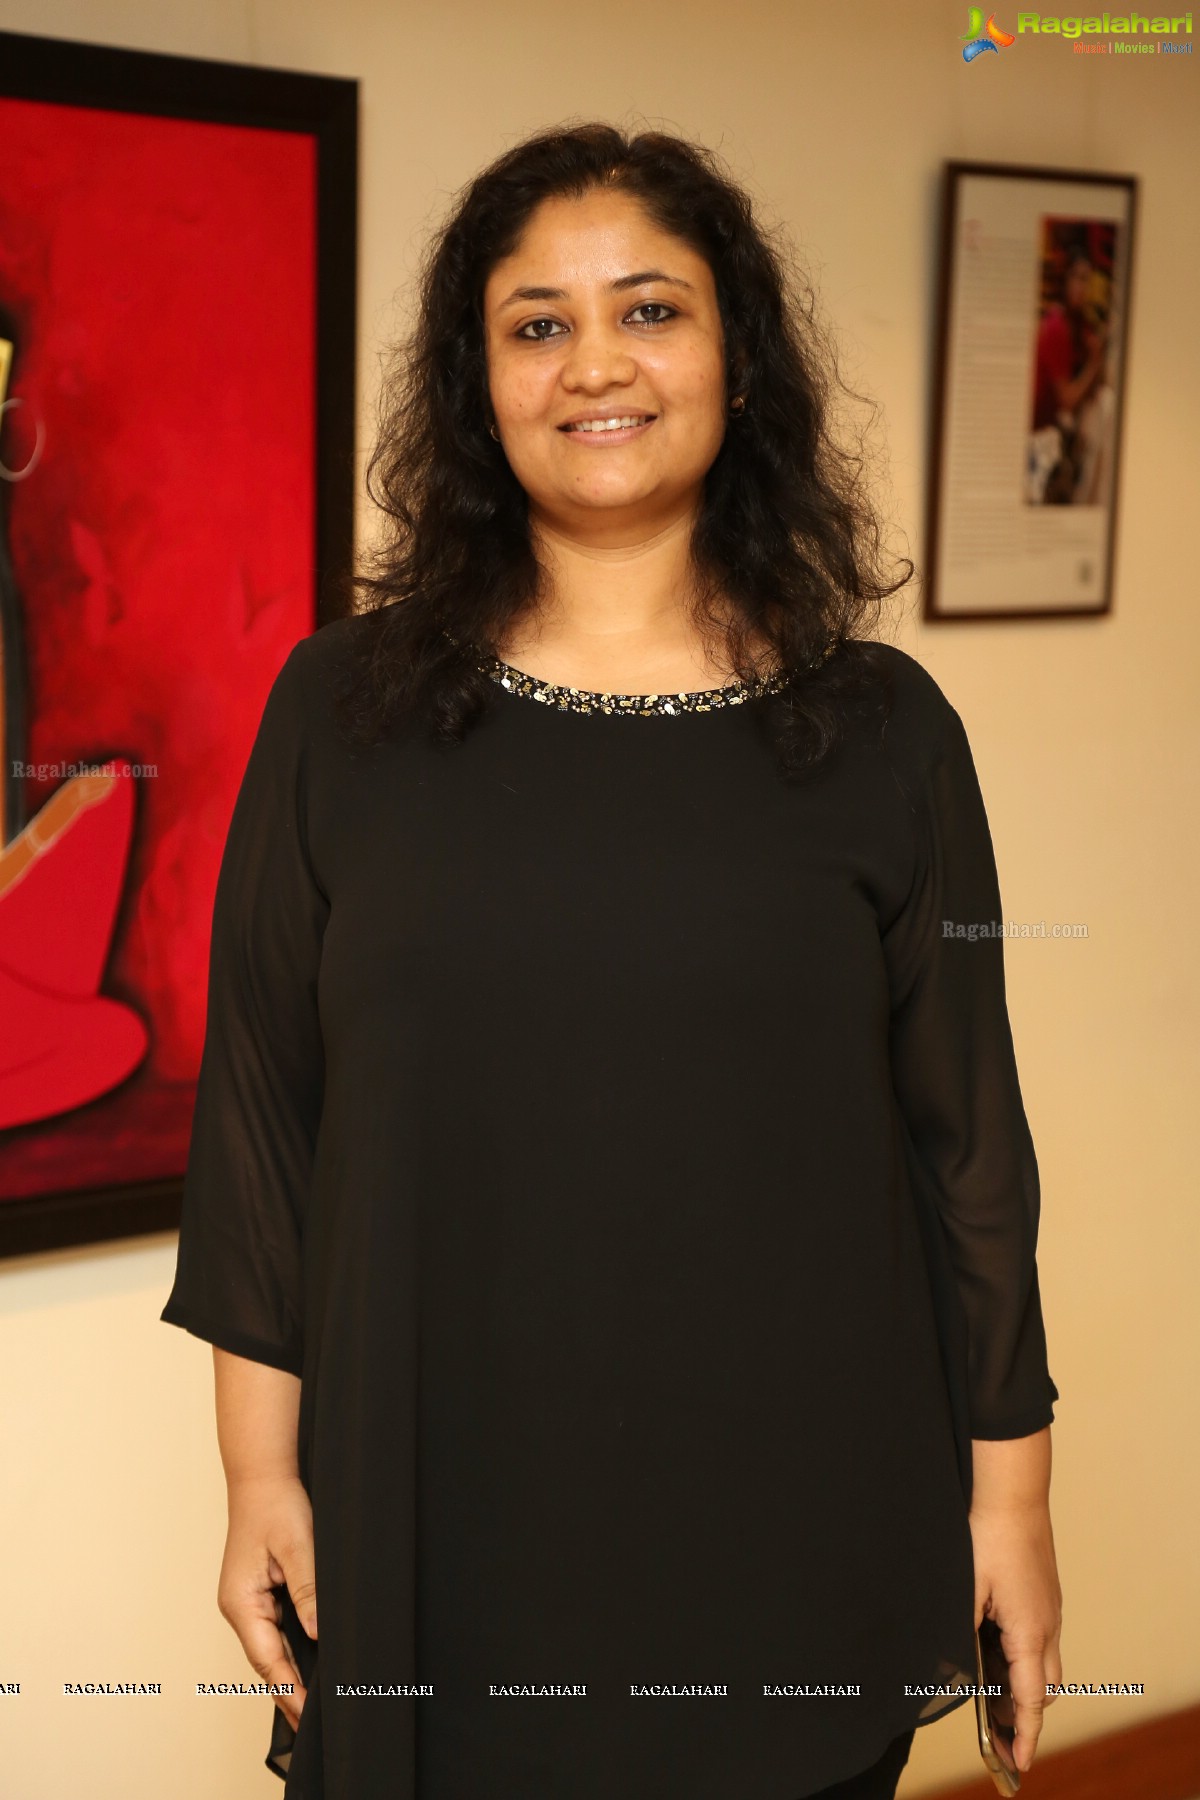 Cryptic Thoughts - Art Exhibition by Rangoli Garg at Muse Art Gallery